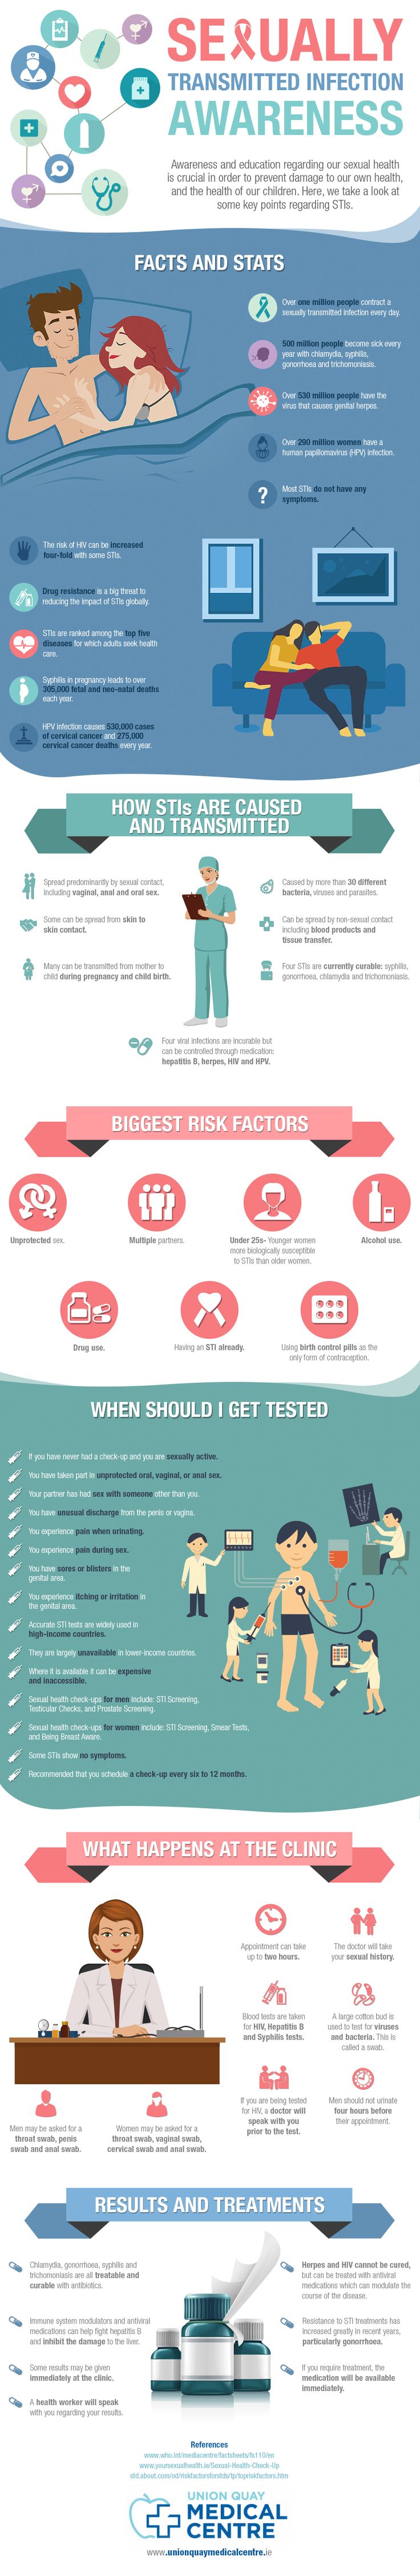 sexually transmitted infection awareness-infographic